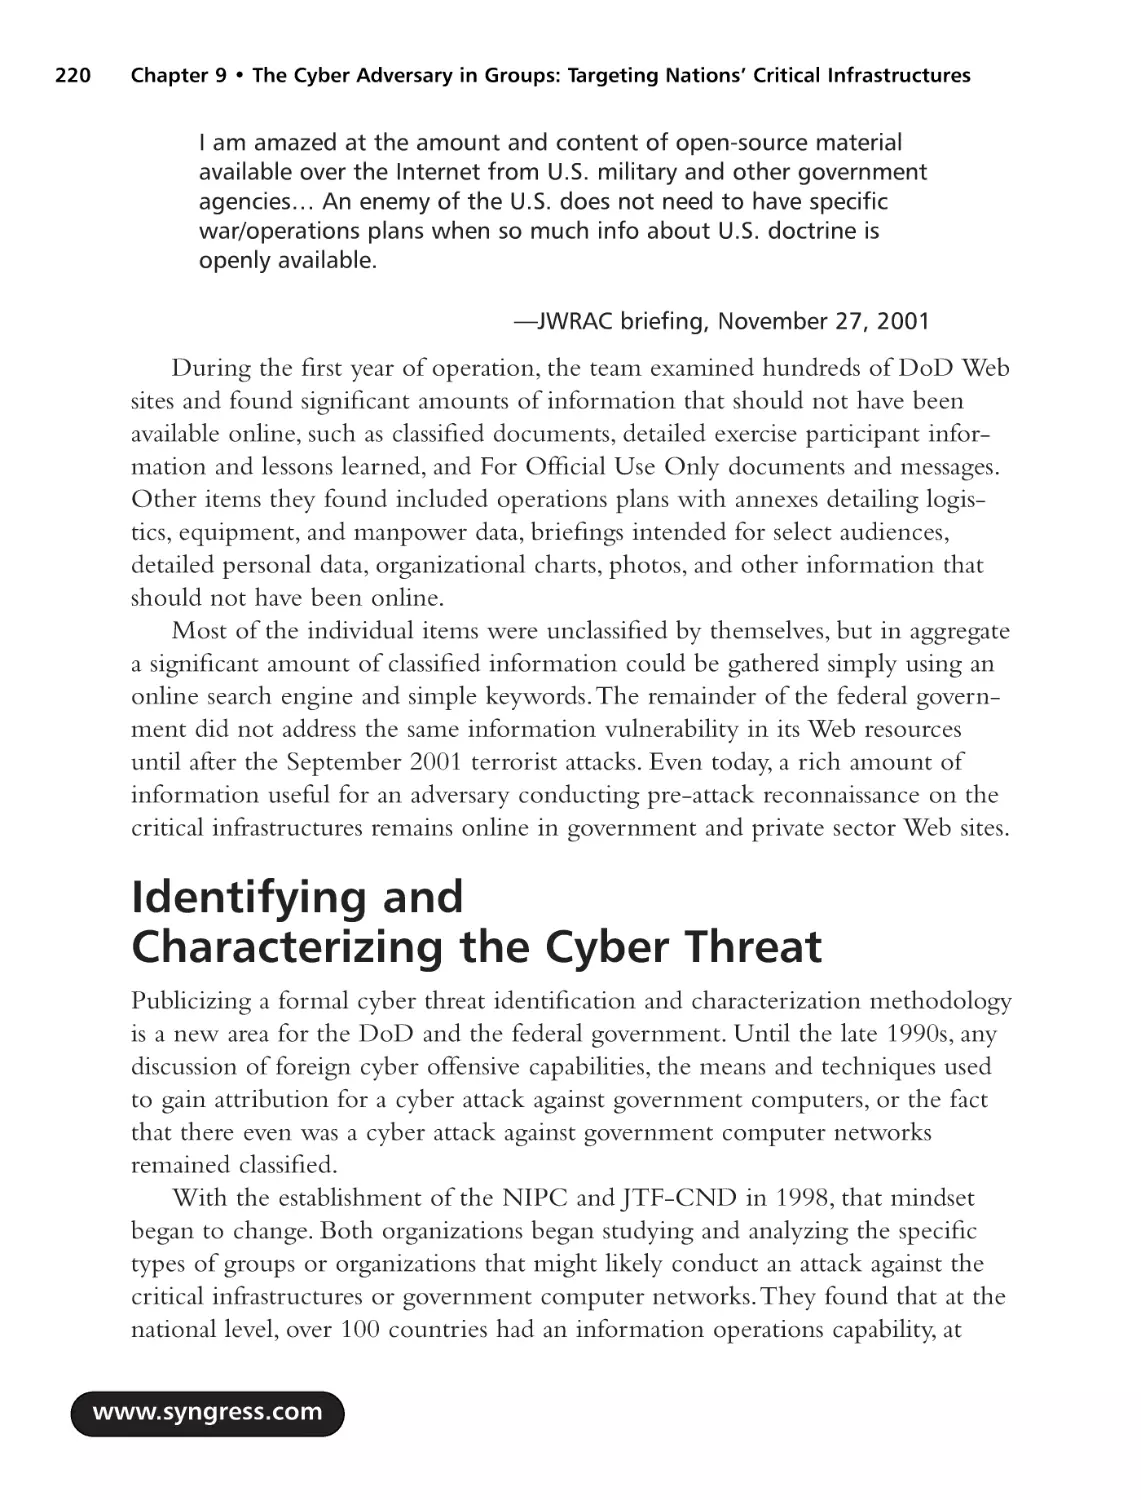 Identifying and Characterizing the Cyber Threat